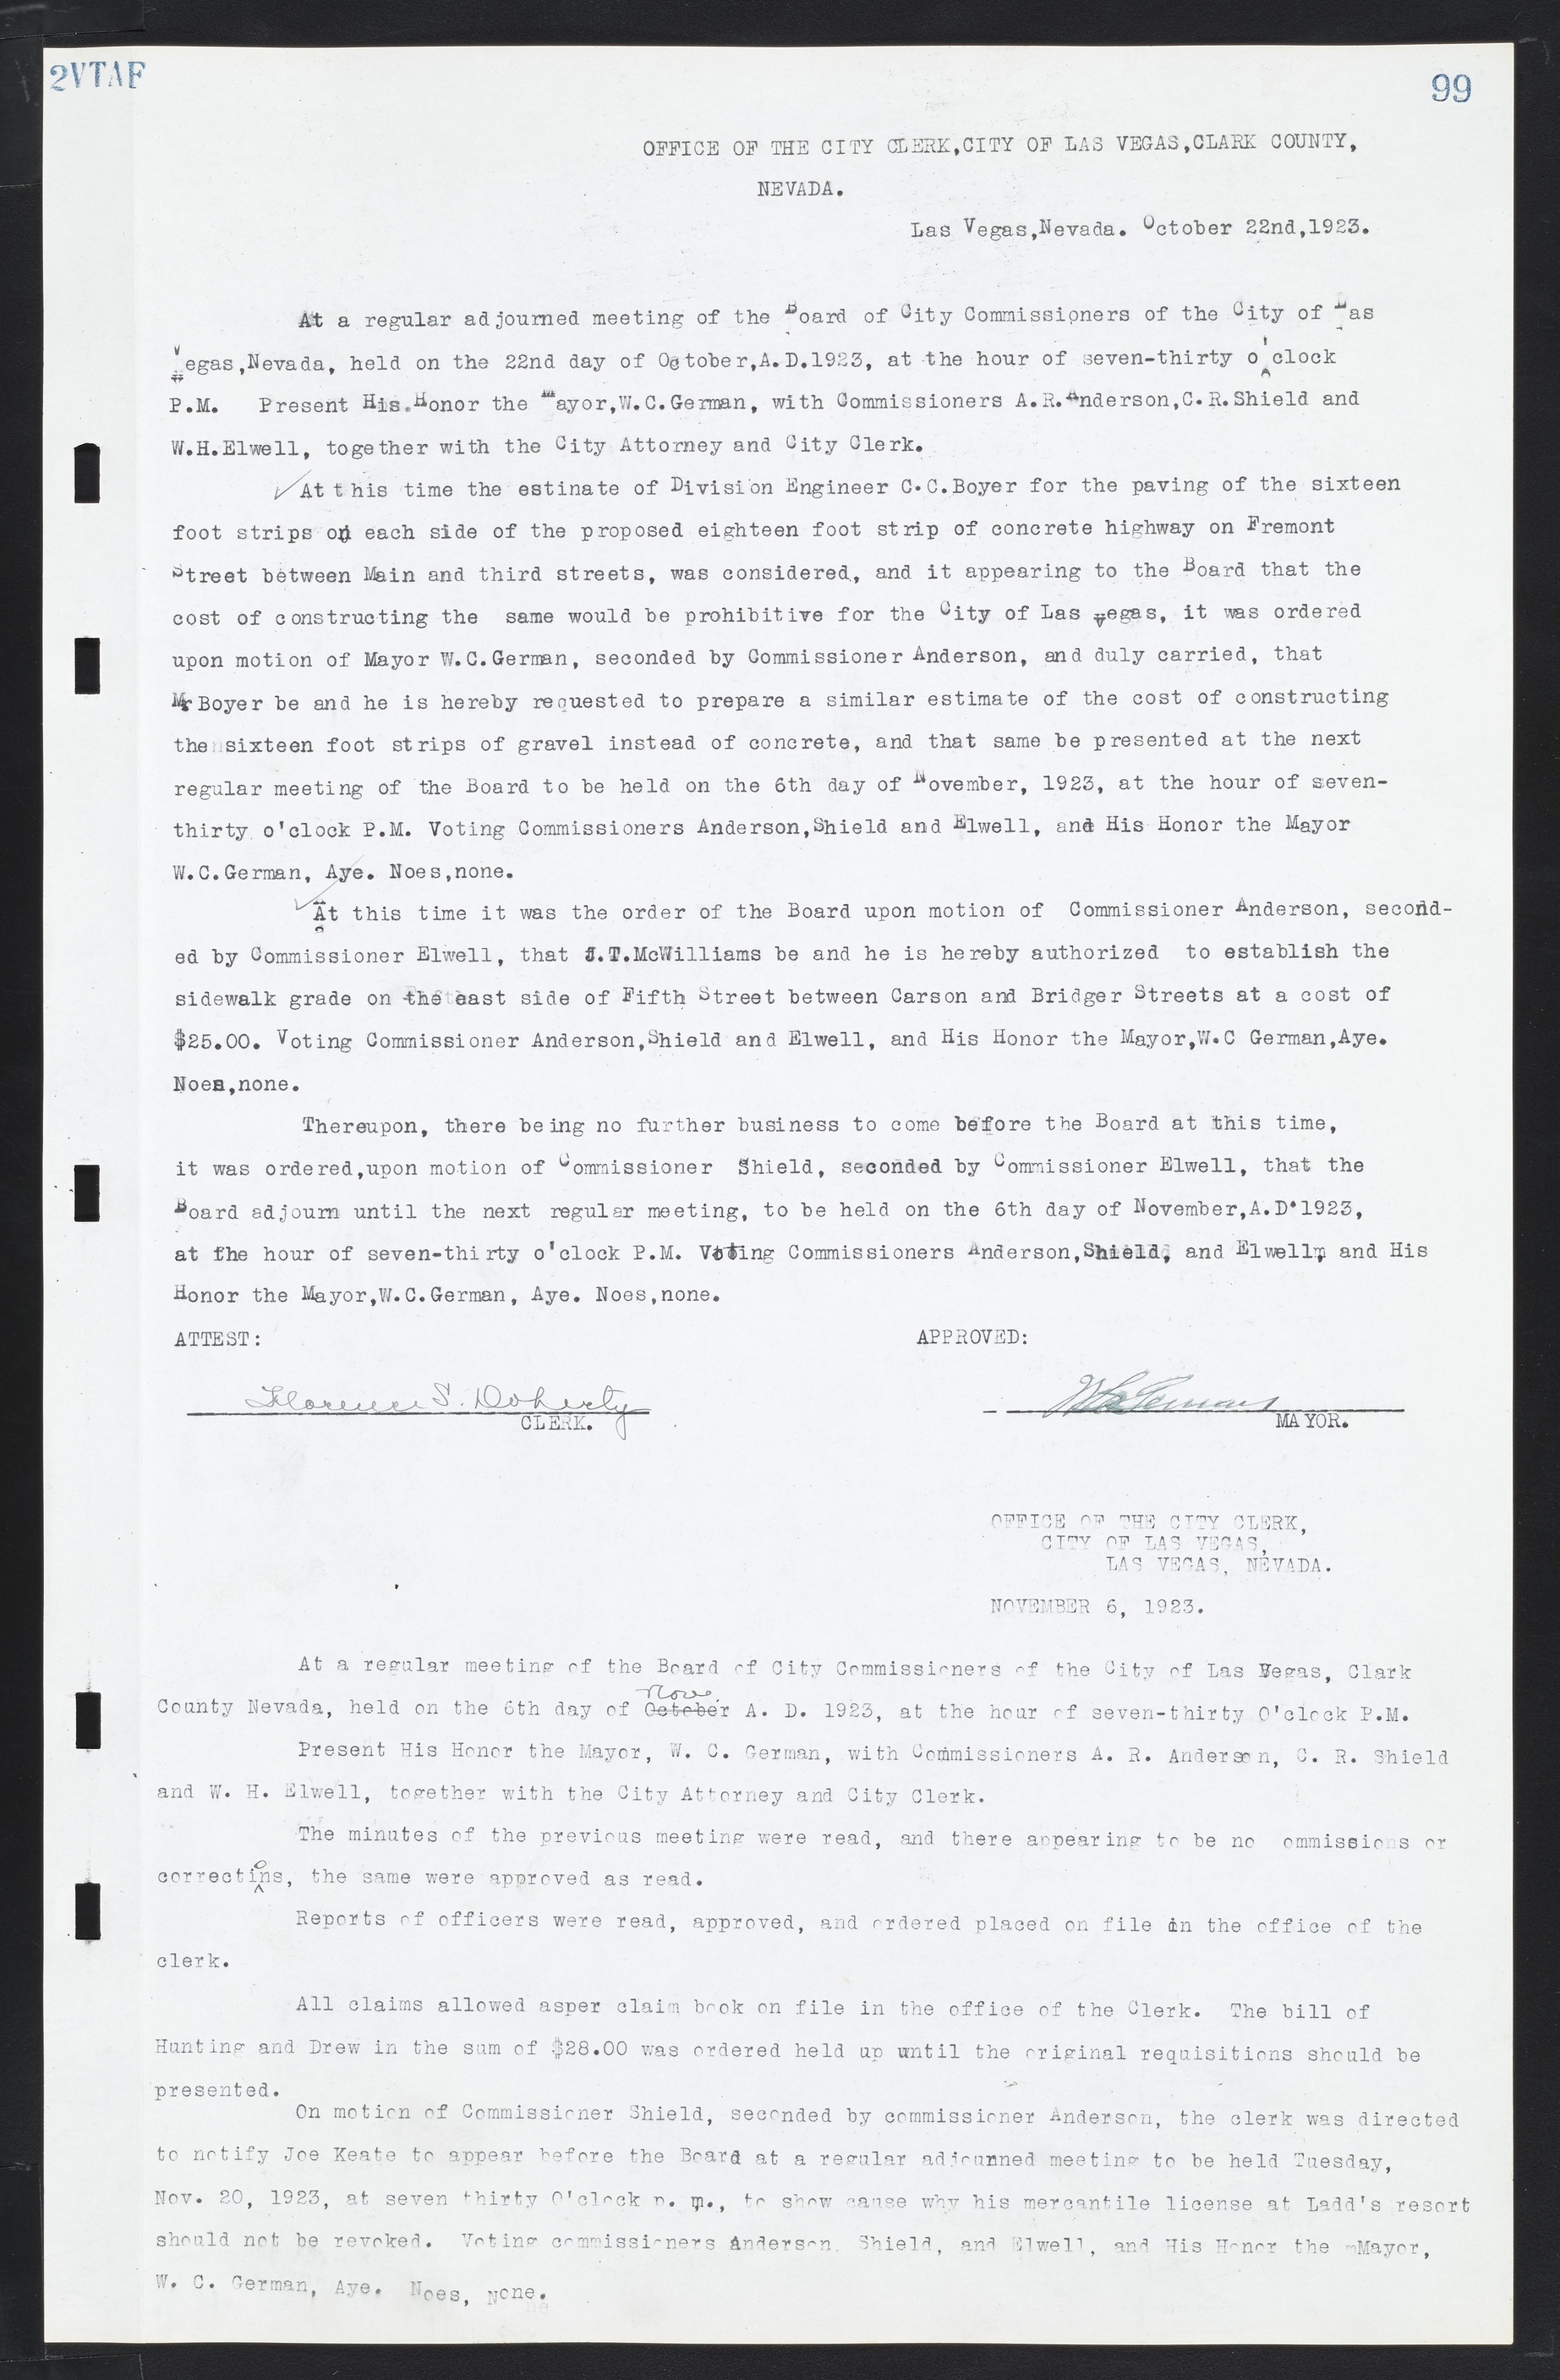 Las Vegas City Commission Minutes, March 1, 1922 to May 10, 1929, lvc000002-106